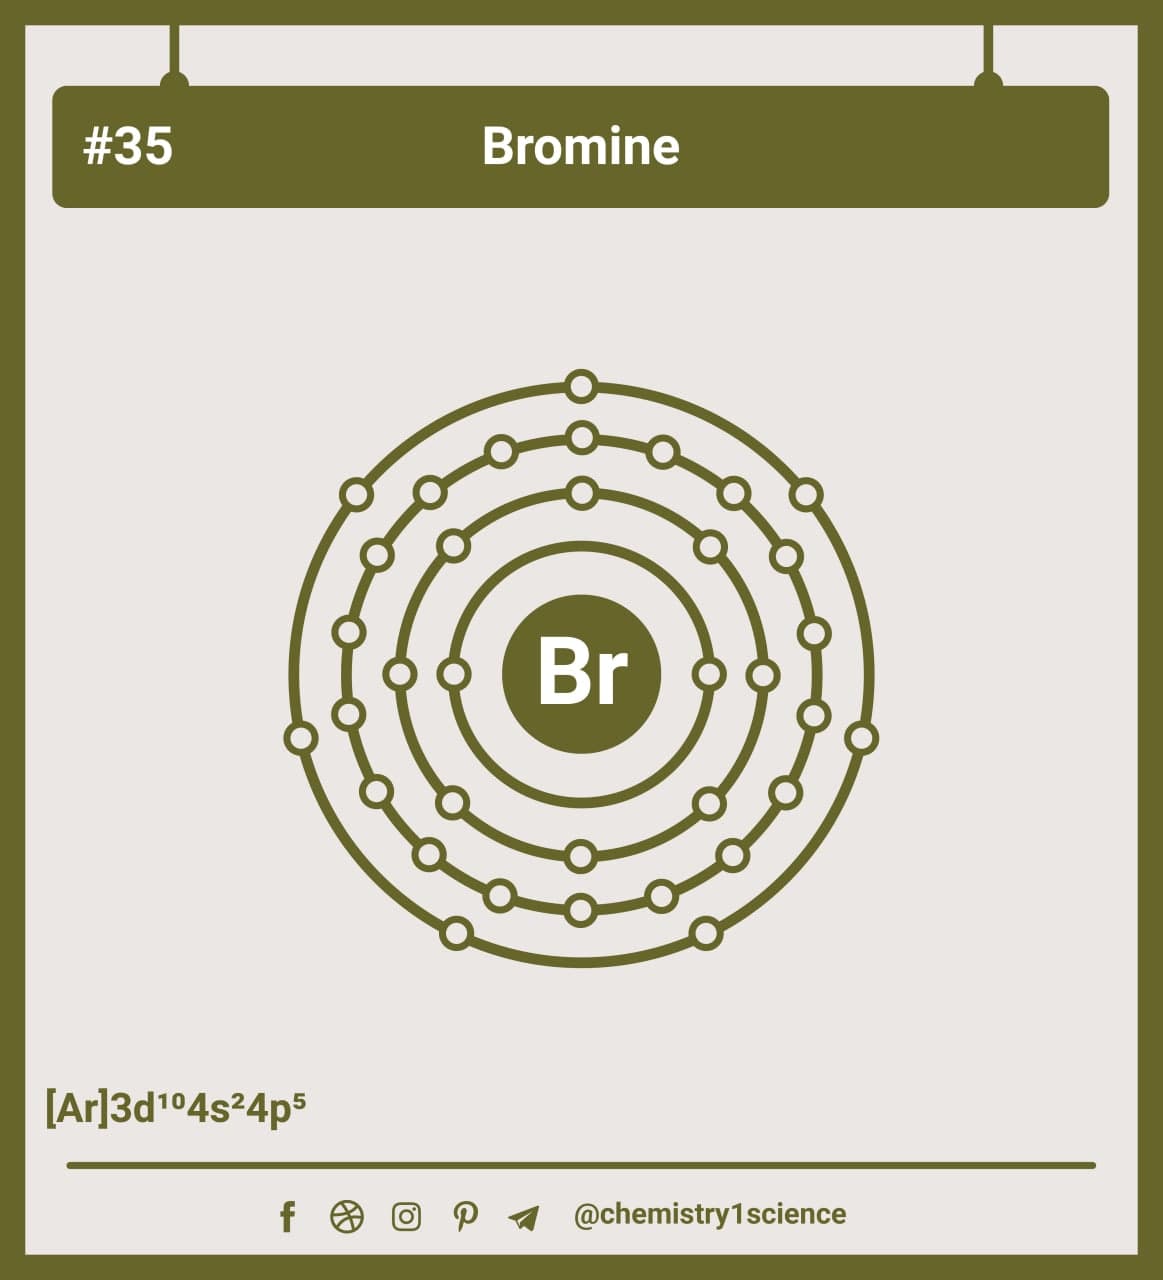 Atom Diagrams Showing Electron Shell Configurations of the Bromine